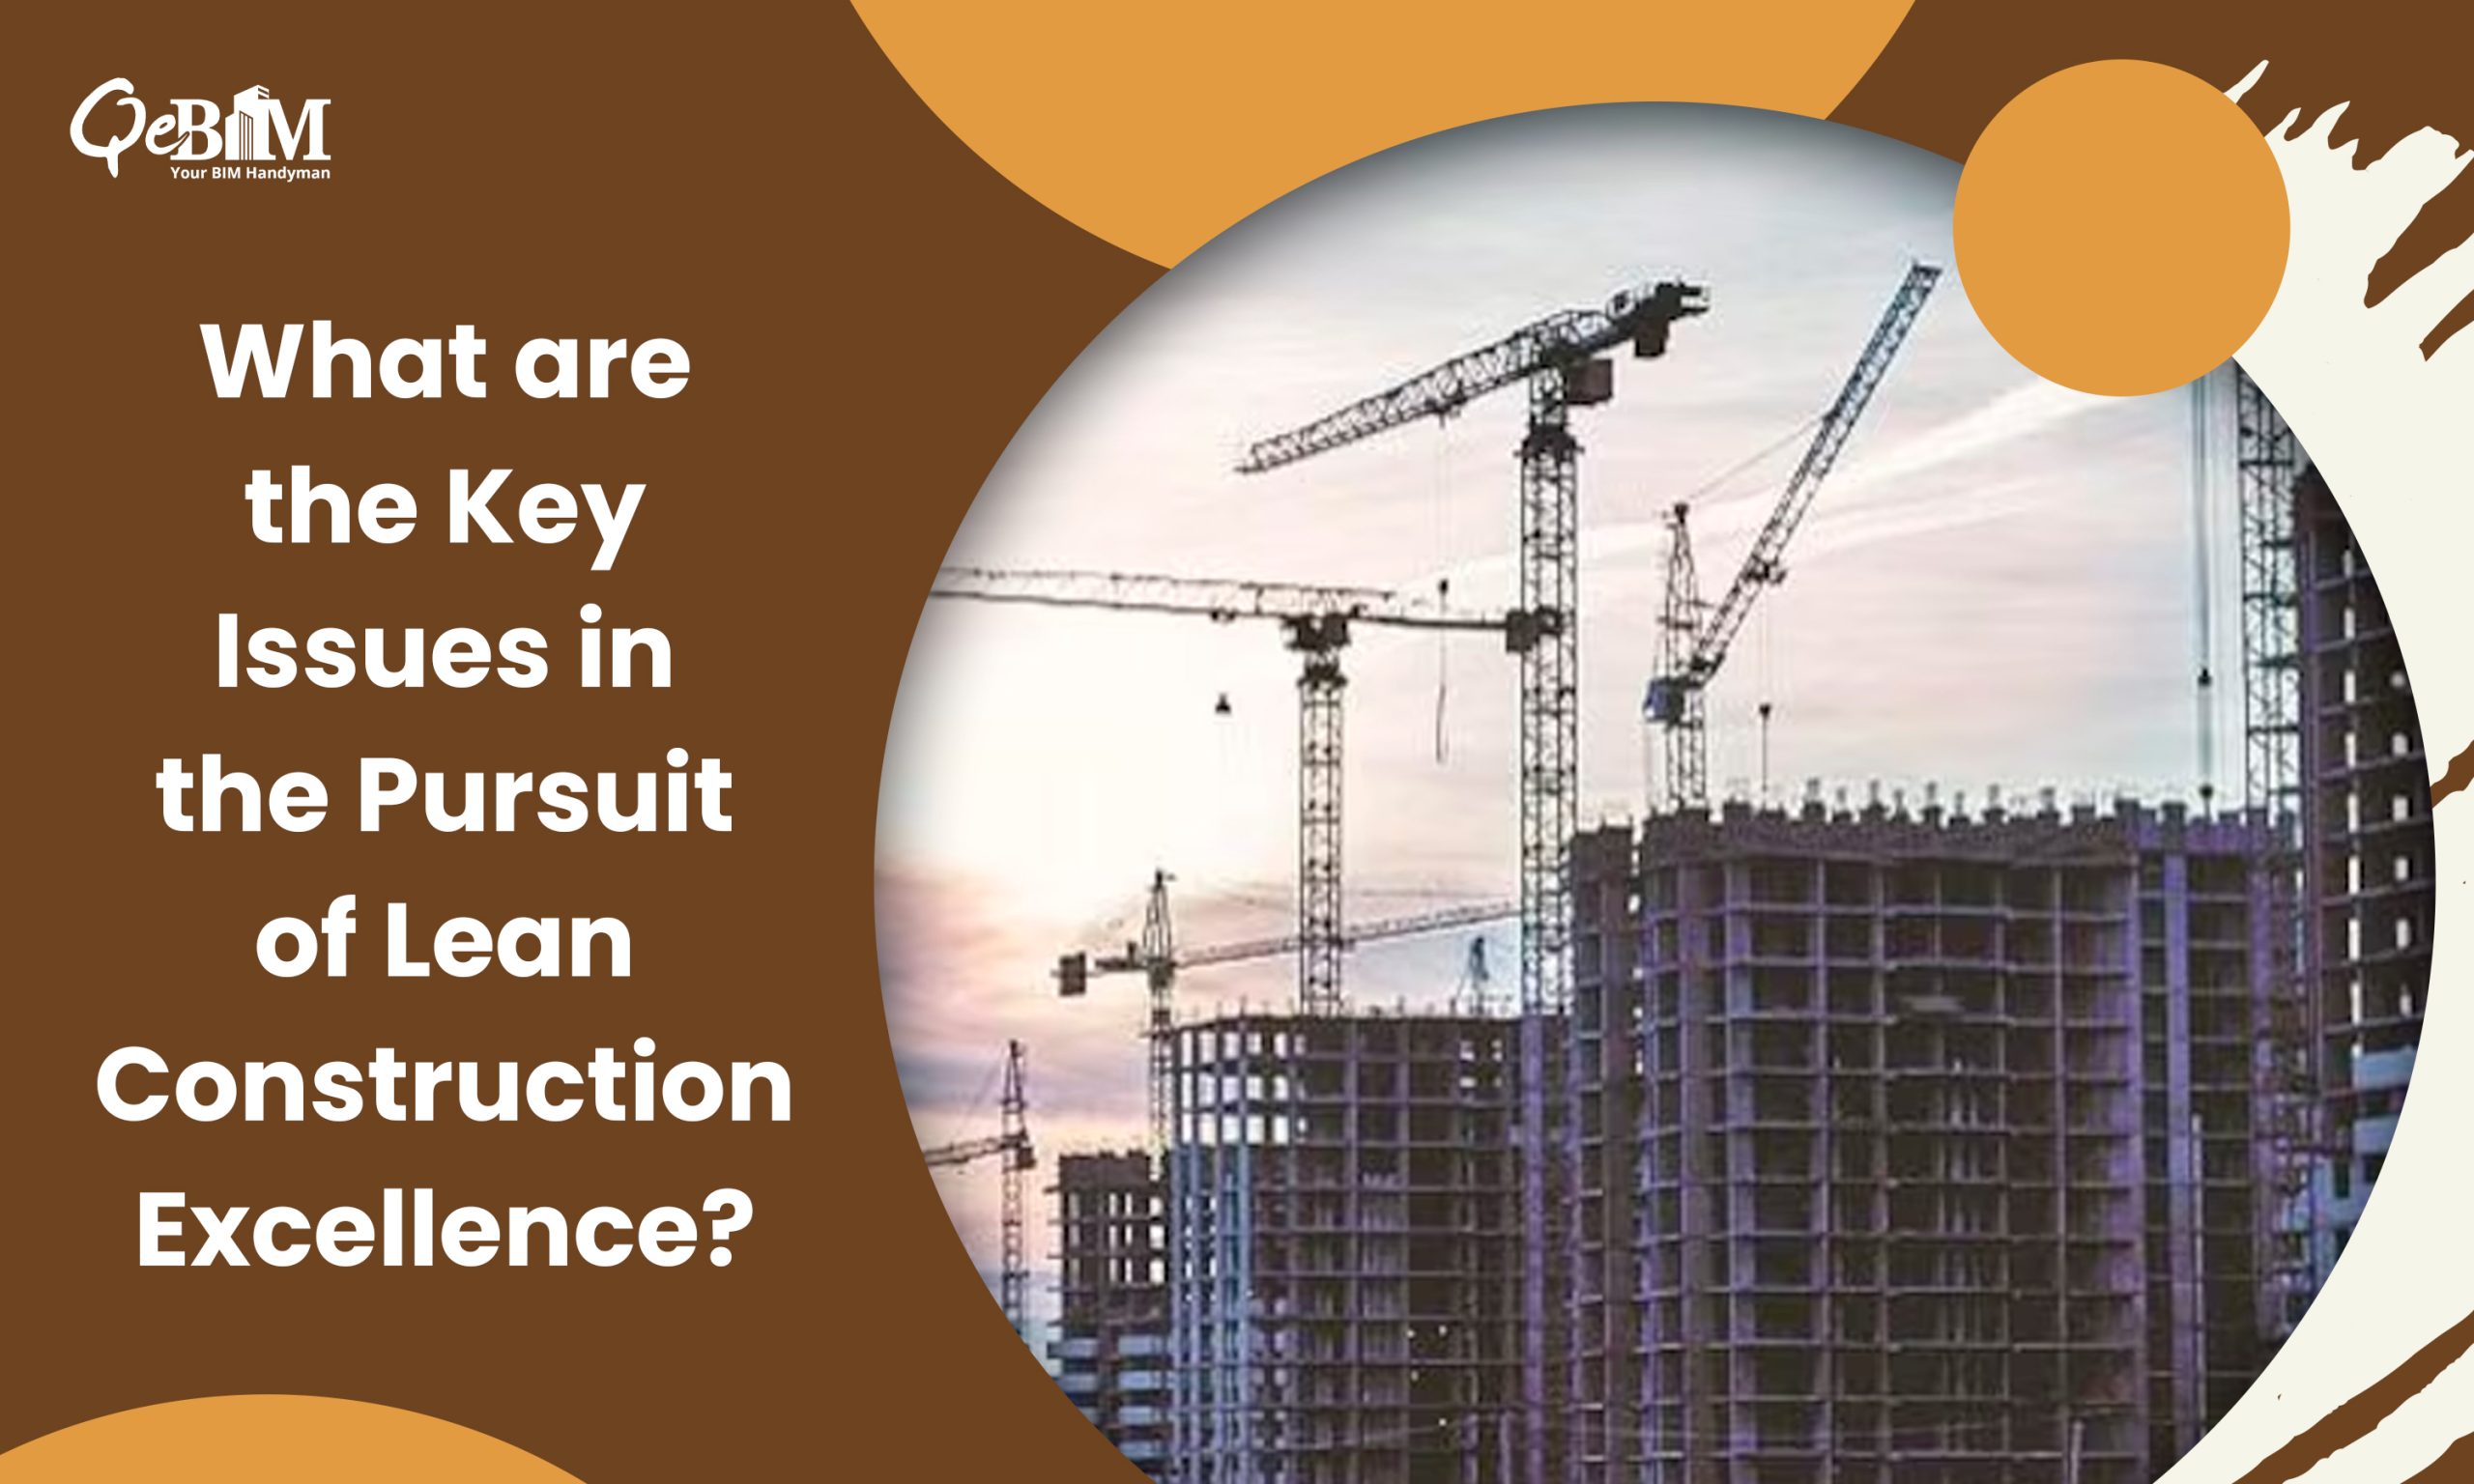 What are the Key Issues in the Pursuit of Lean Construction Excellence?